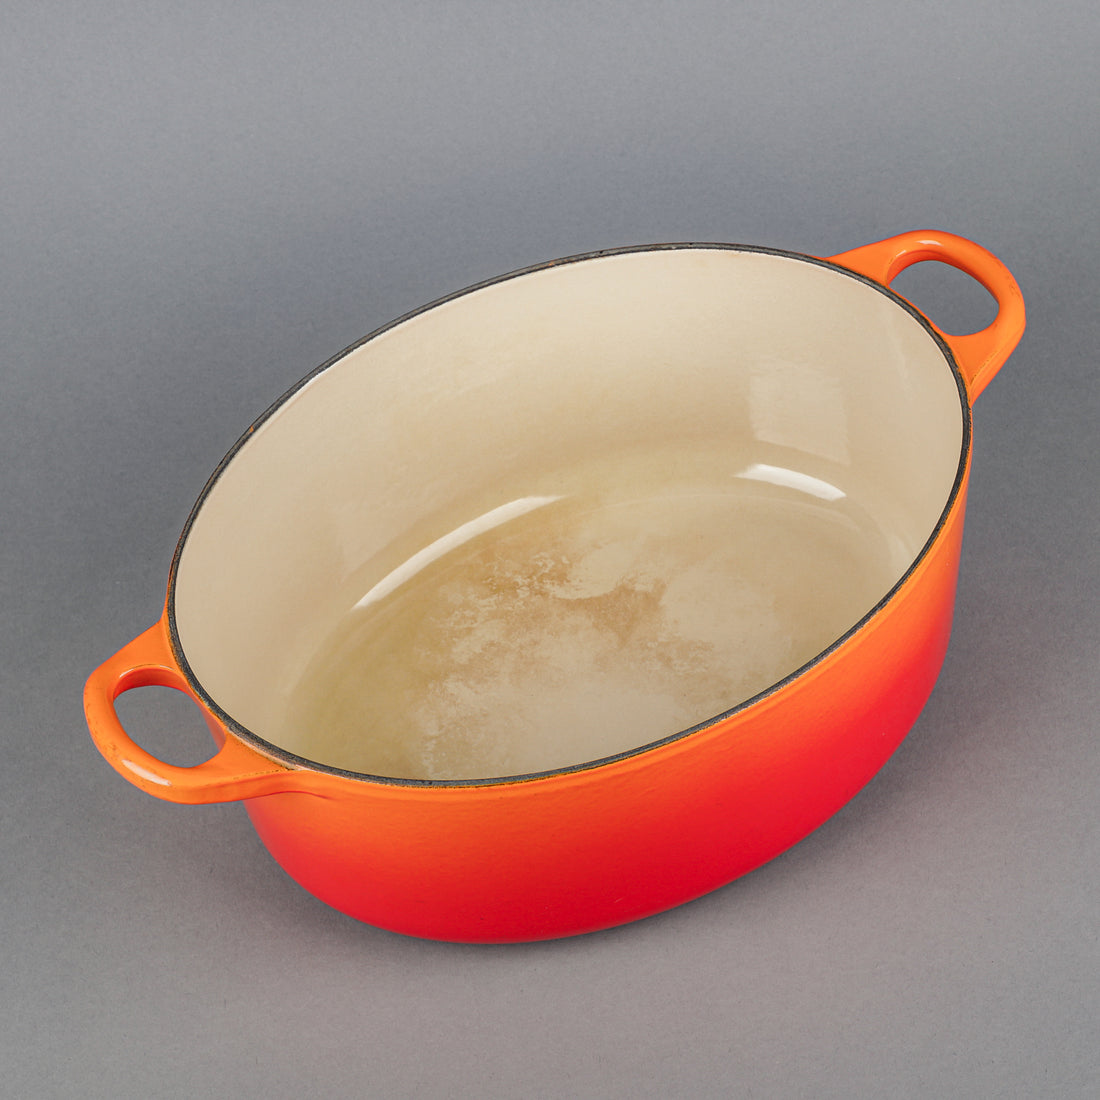 LE CREUSET Enamelled Cast Iron Oval Covered Dutch Oven - Flame